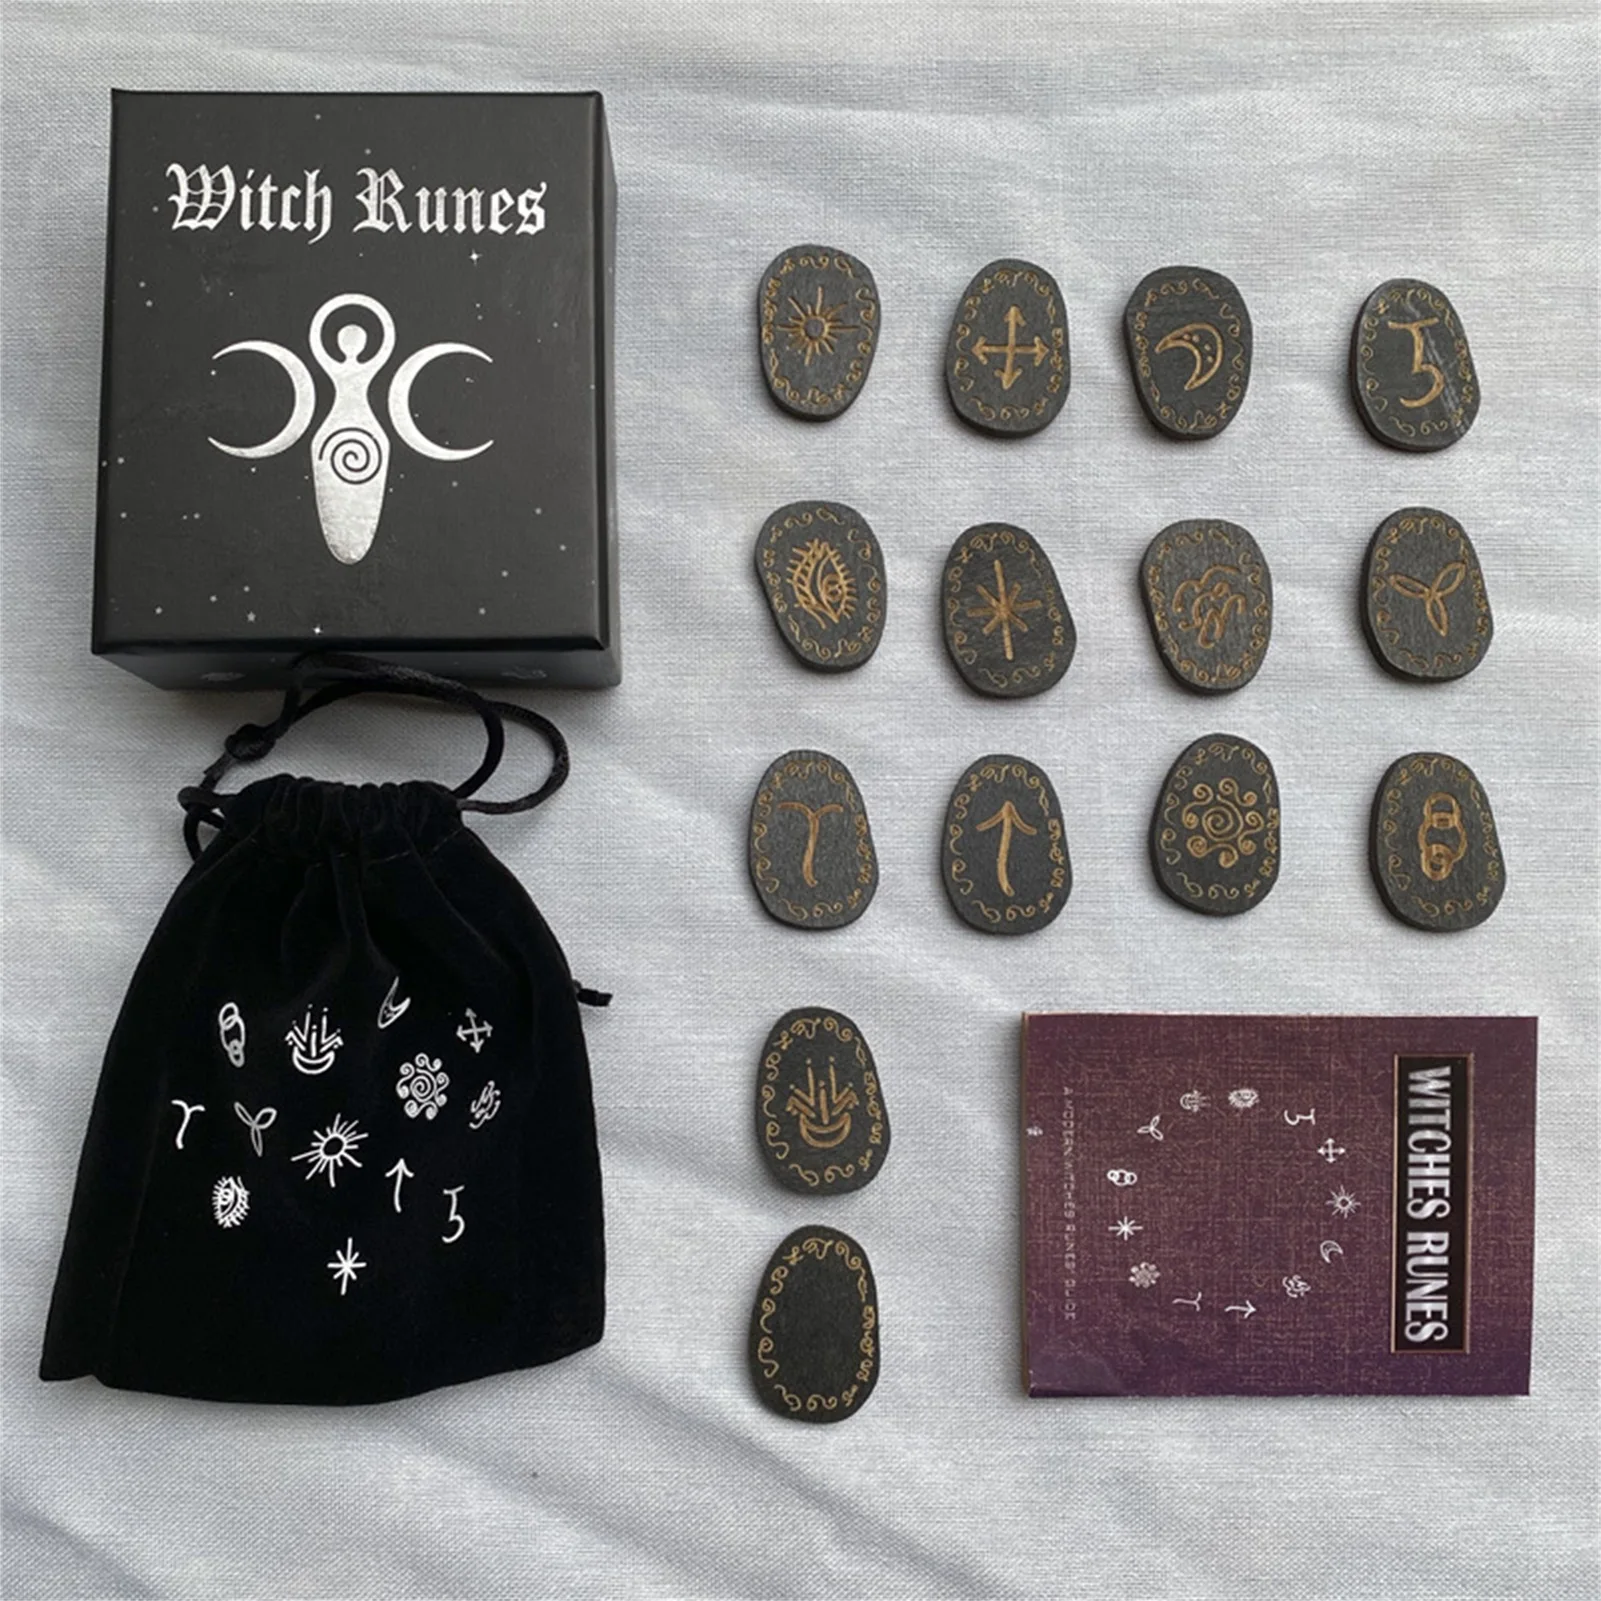 

14 Pcs Witches Rune Set Wooden Runes Stone Set Engraved Rune Symbol for Meditation Divination Rune Stones Set with Storage Bag